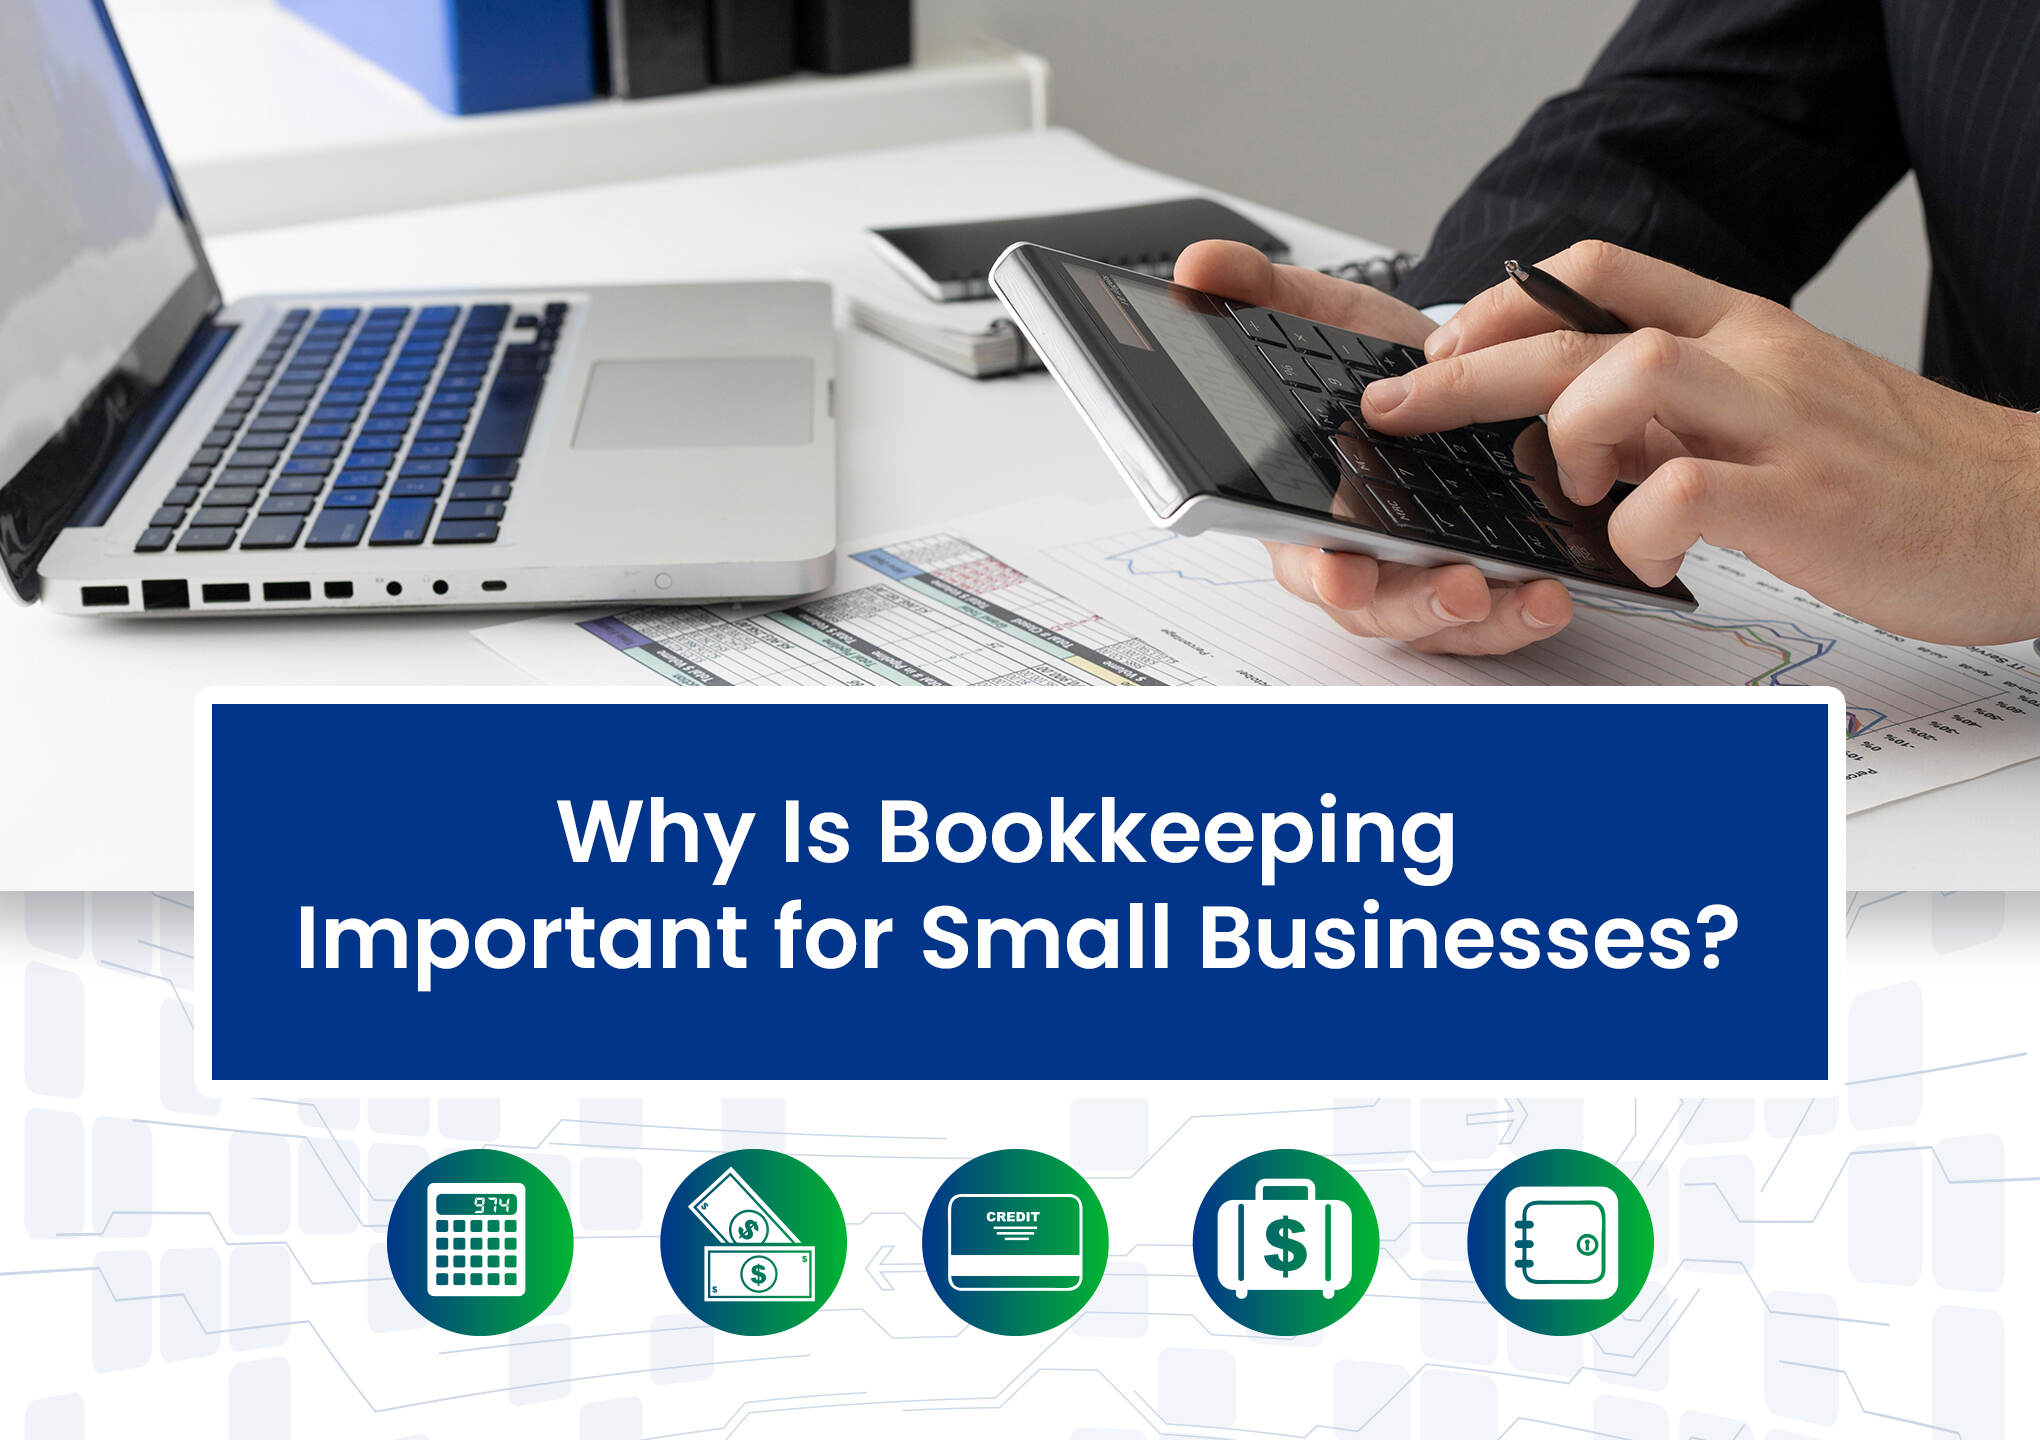 Why Is Bookkeeping Important for Small Businesses?